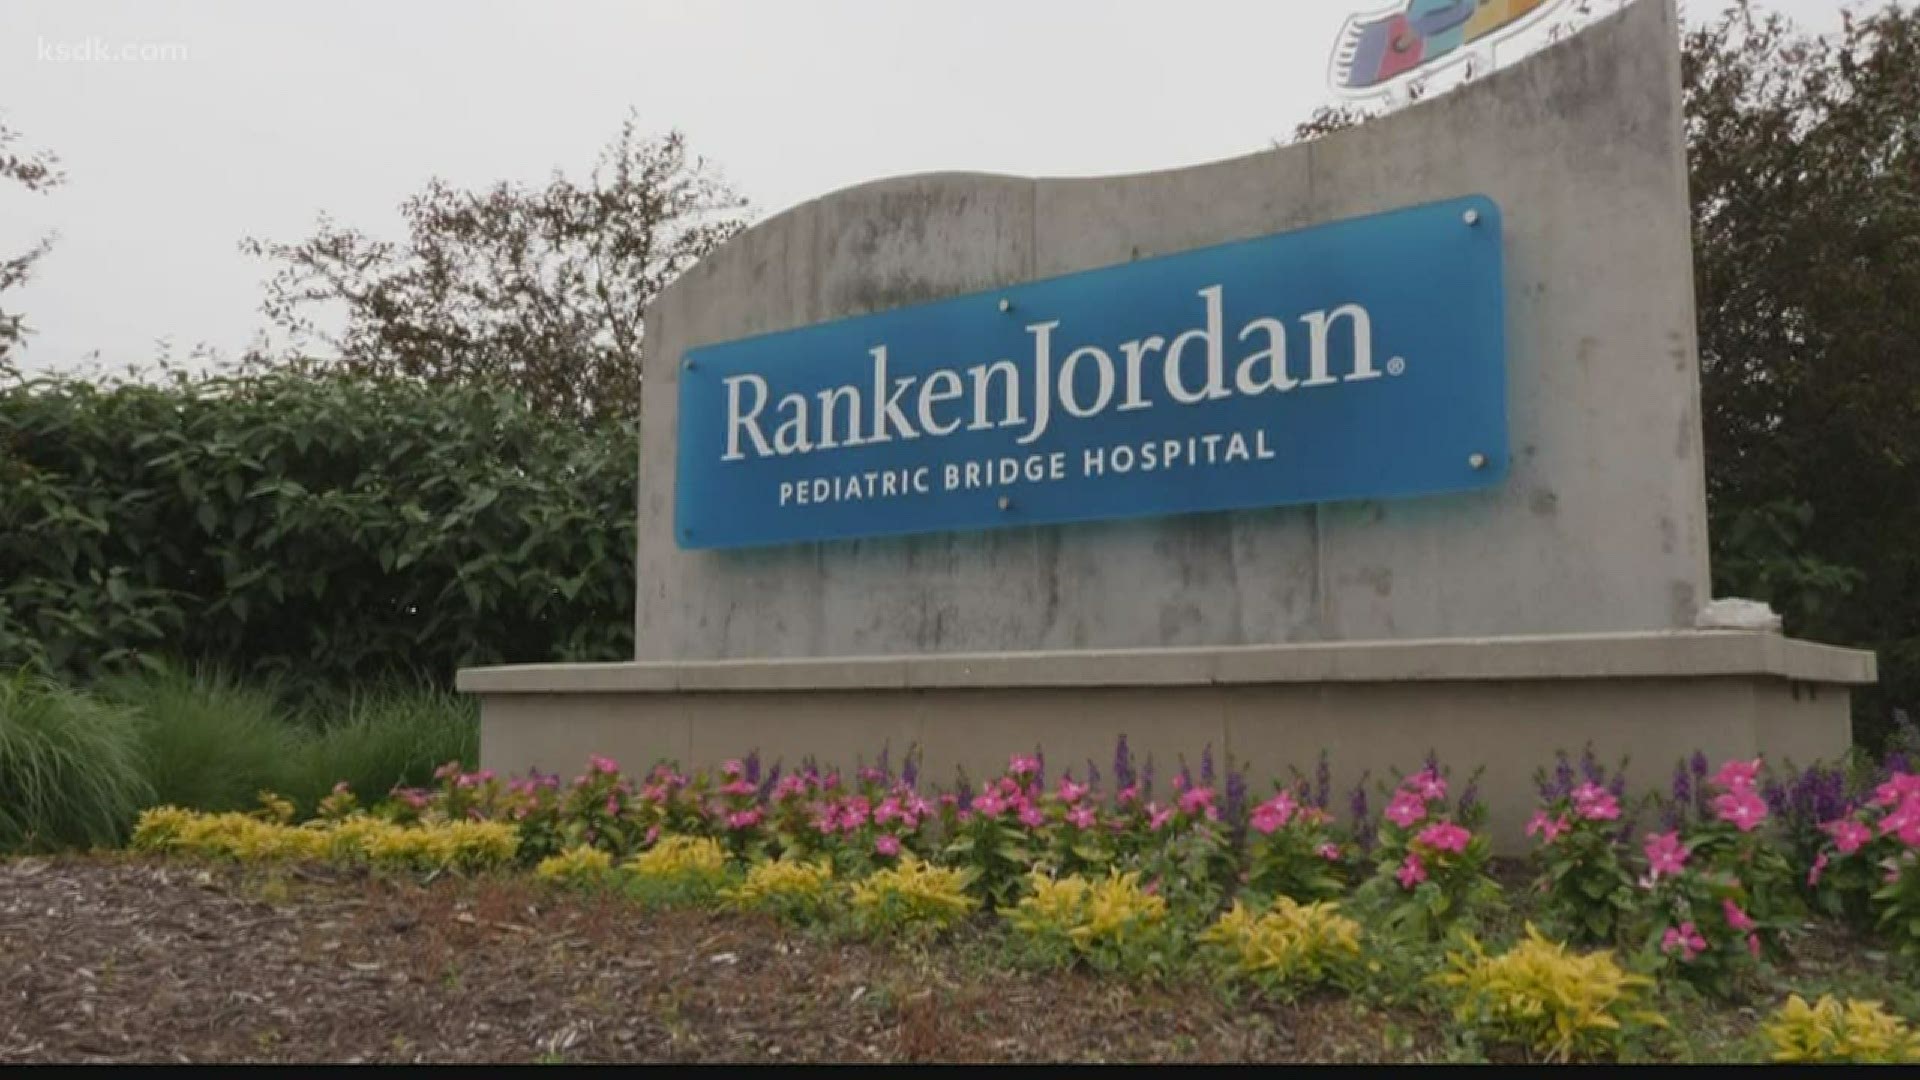 Many of the children at RankenJordan are already on ventilators, so COVID-19 making its way to the facility could be deadly.